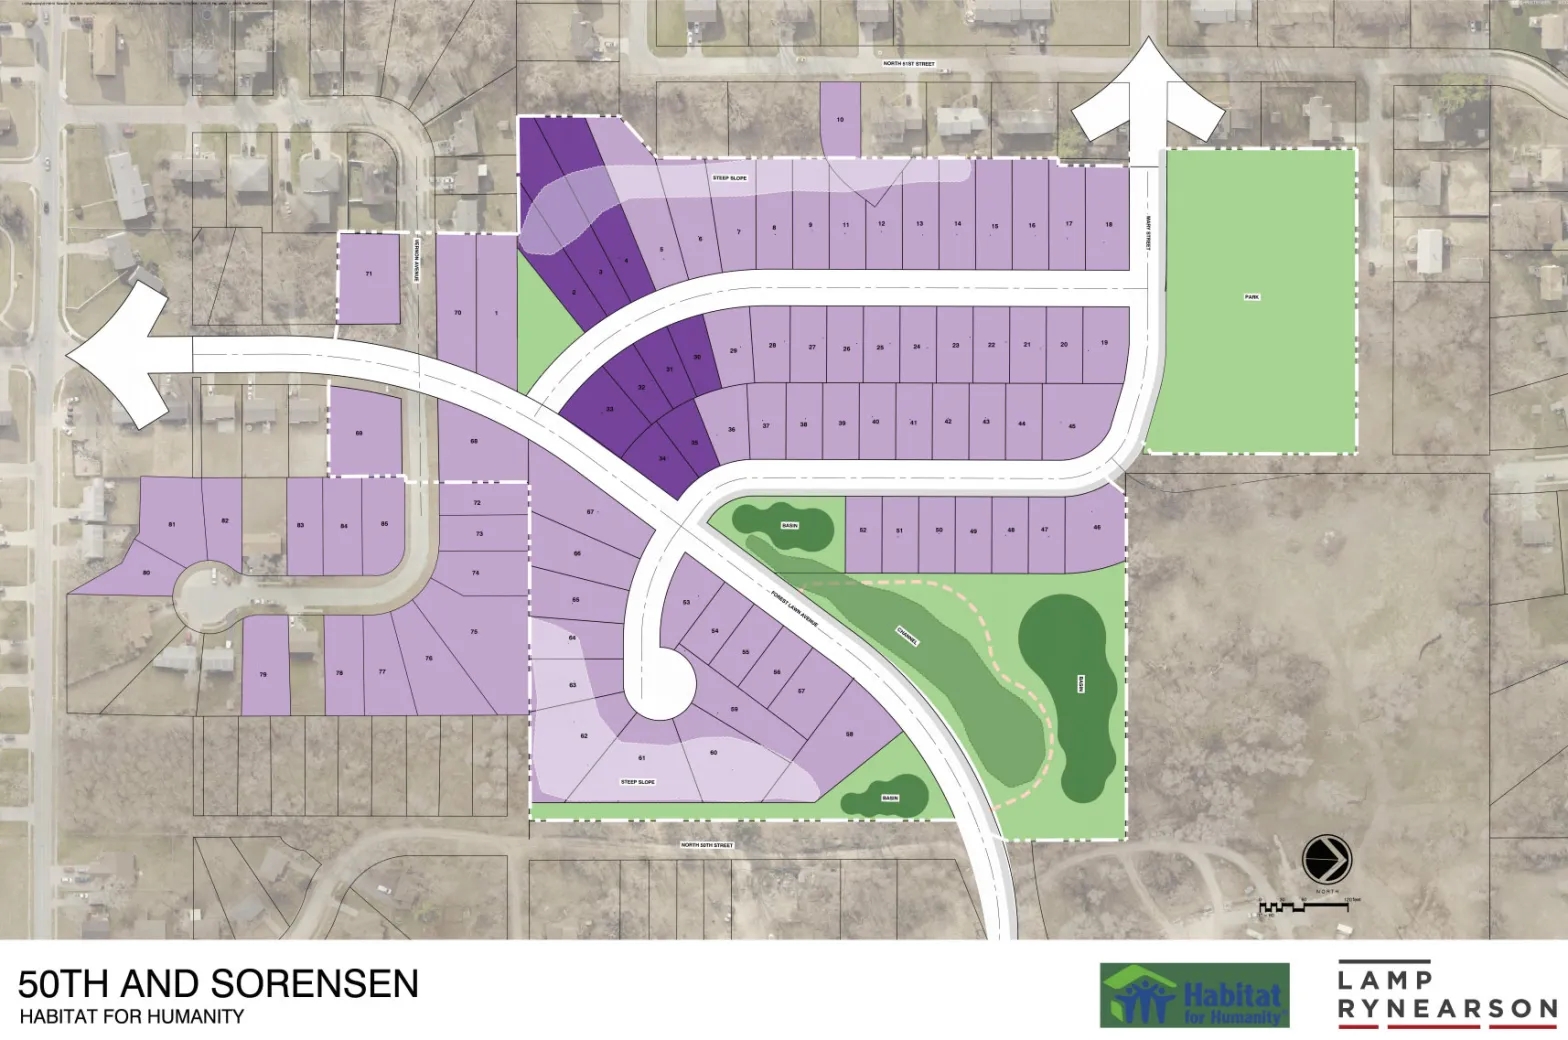 A map of the Bluestem Prairie development by Habitat for Humanity at North 50th and Sorensen Pkwy in North Omaha, Nebraska